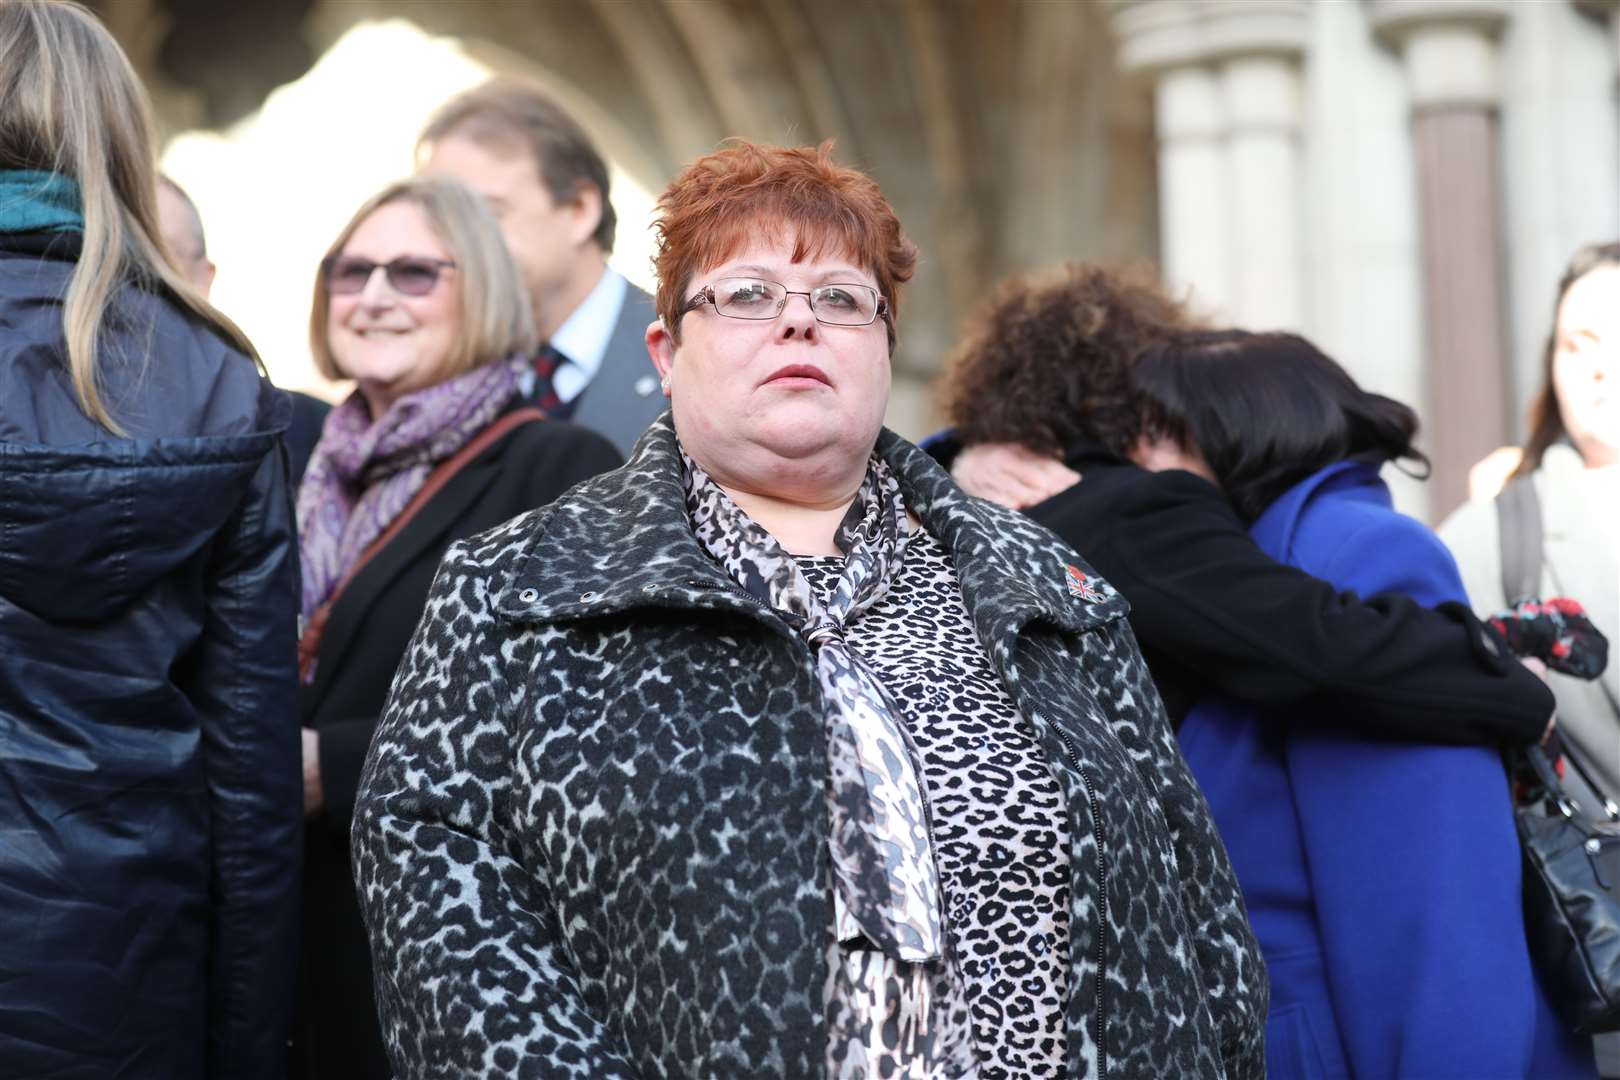 Sarah Jane Young, the daughter of one of the Hyde Park victims, outside court in 2019 (Isabel Infantes/PA)